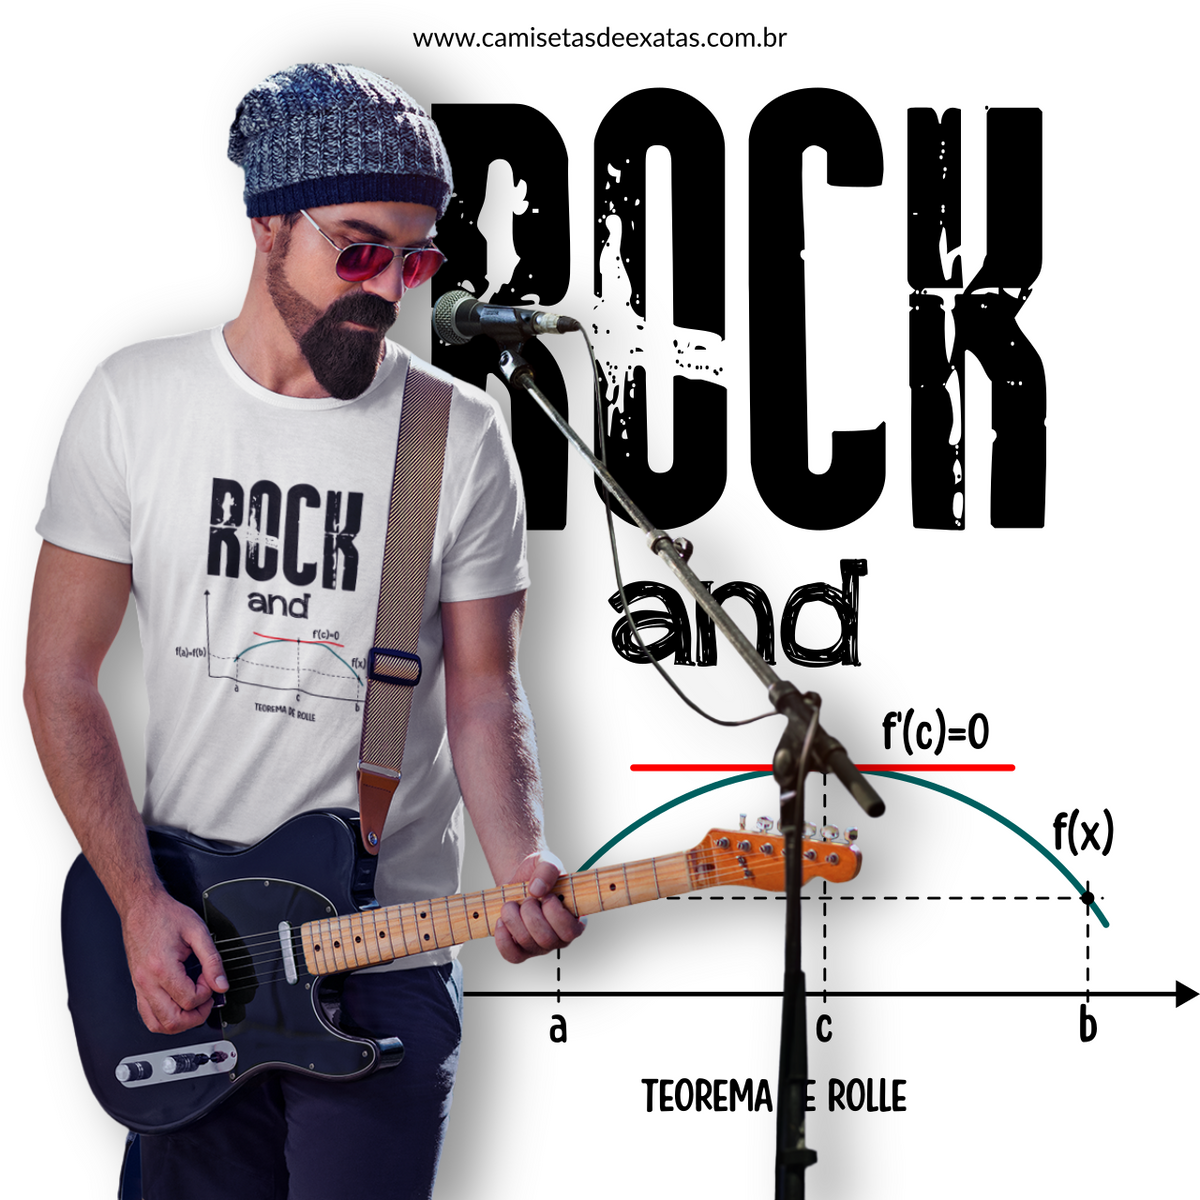 Nome do produto: ROCK AND ROLLE [1]